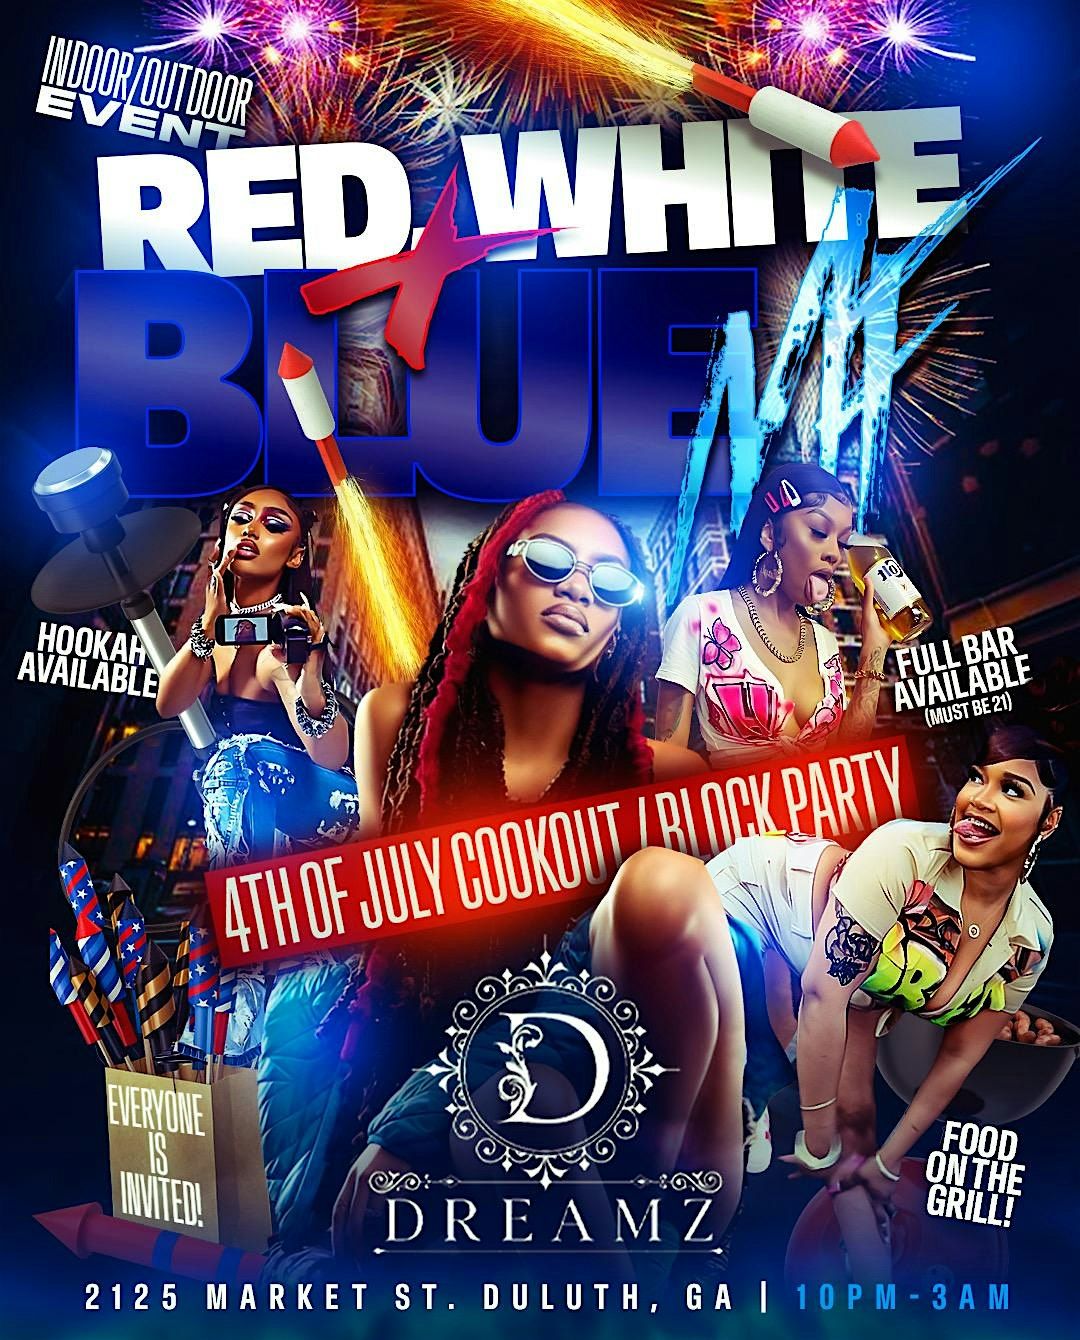 RED, WHITE, & BLUE MF (COOKOUT\/BLOCK PARTY) FREE ENTRY UNTIL 10:30PM